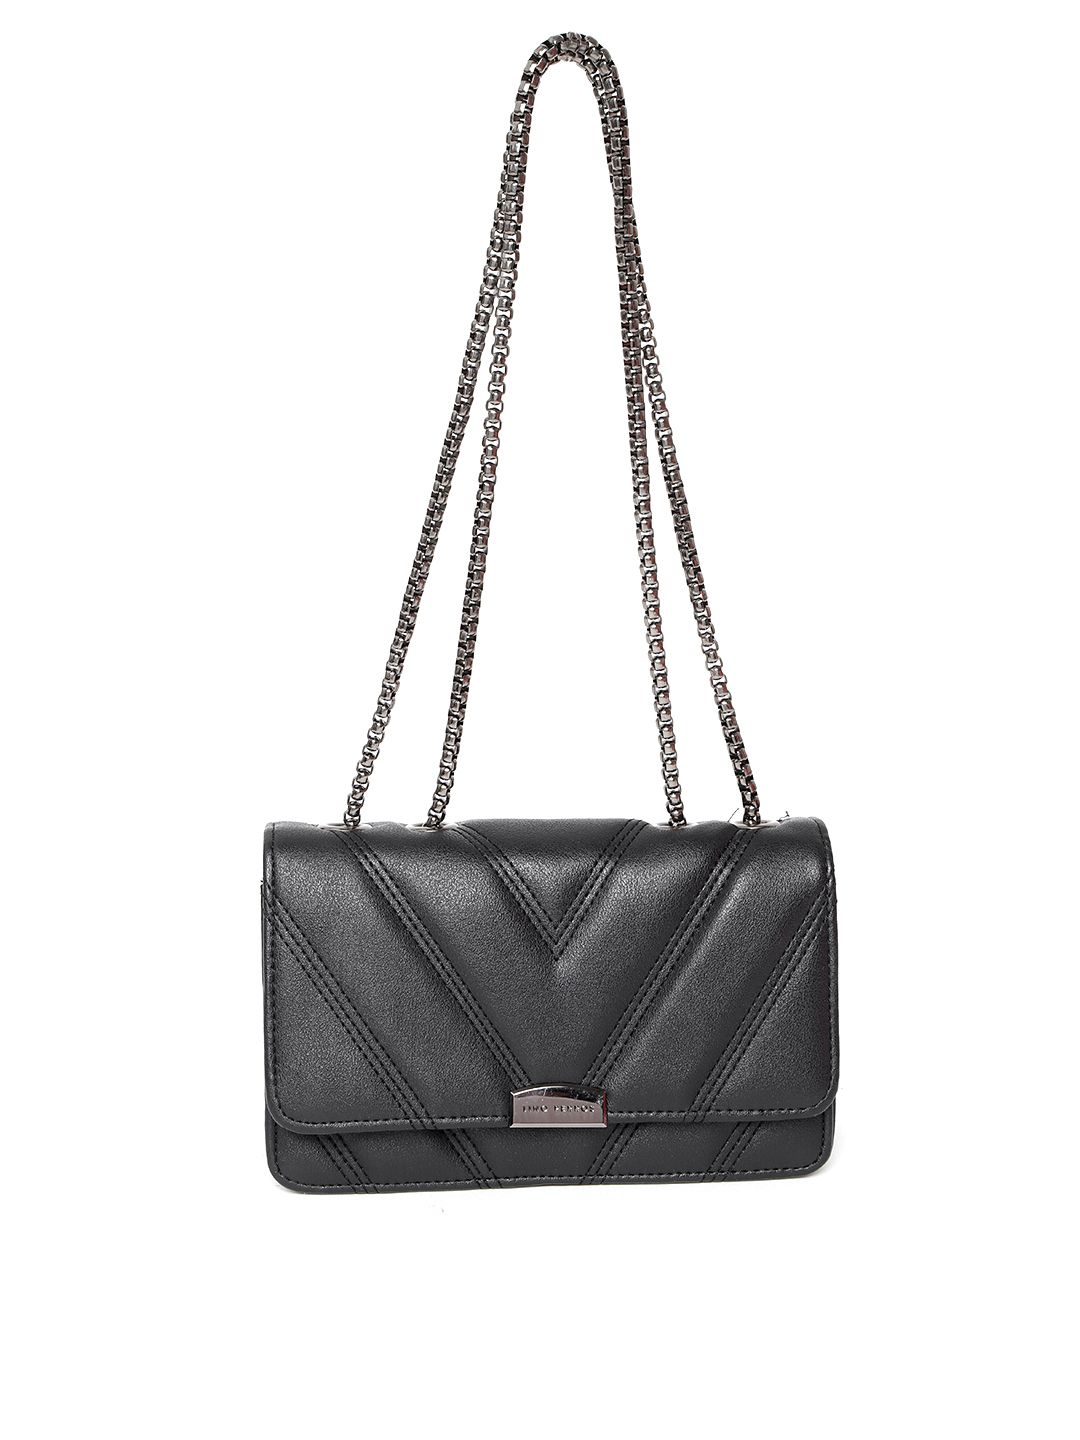 Lino Perros Black Solid Quilted Shoulder Bag Price in India